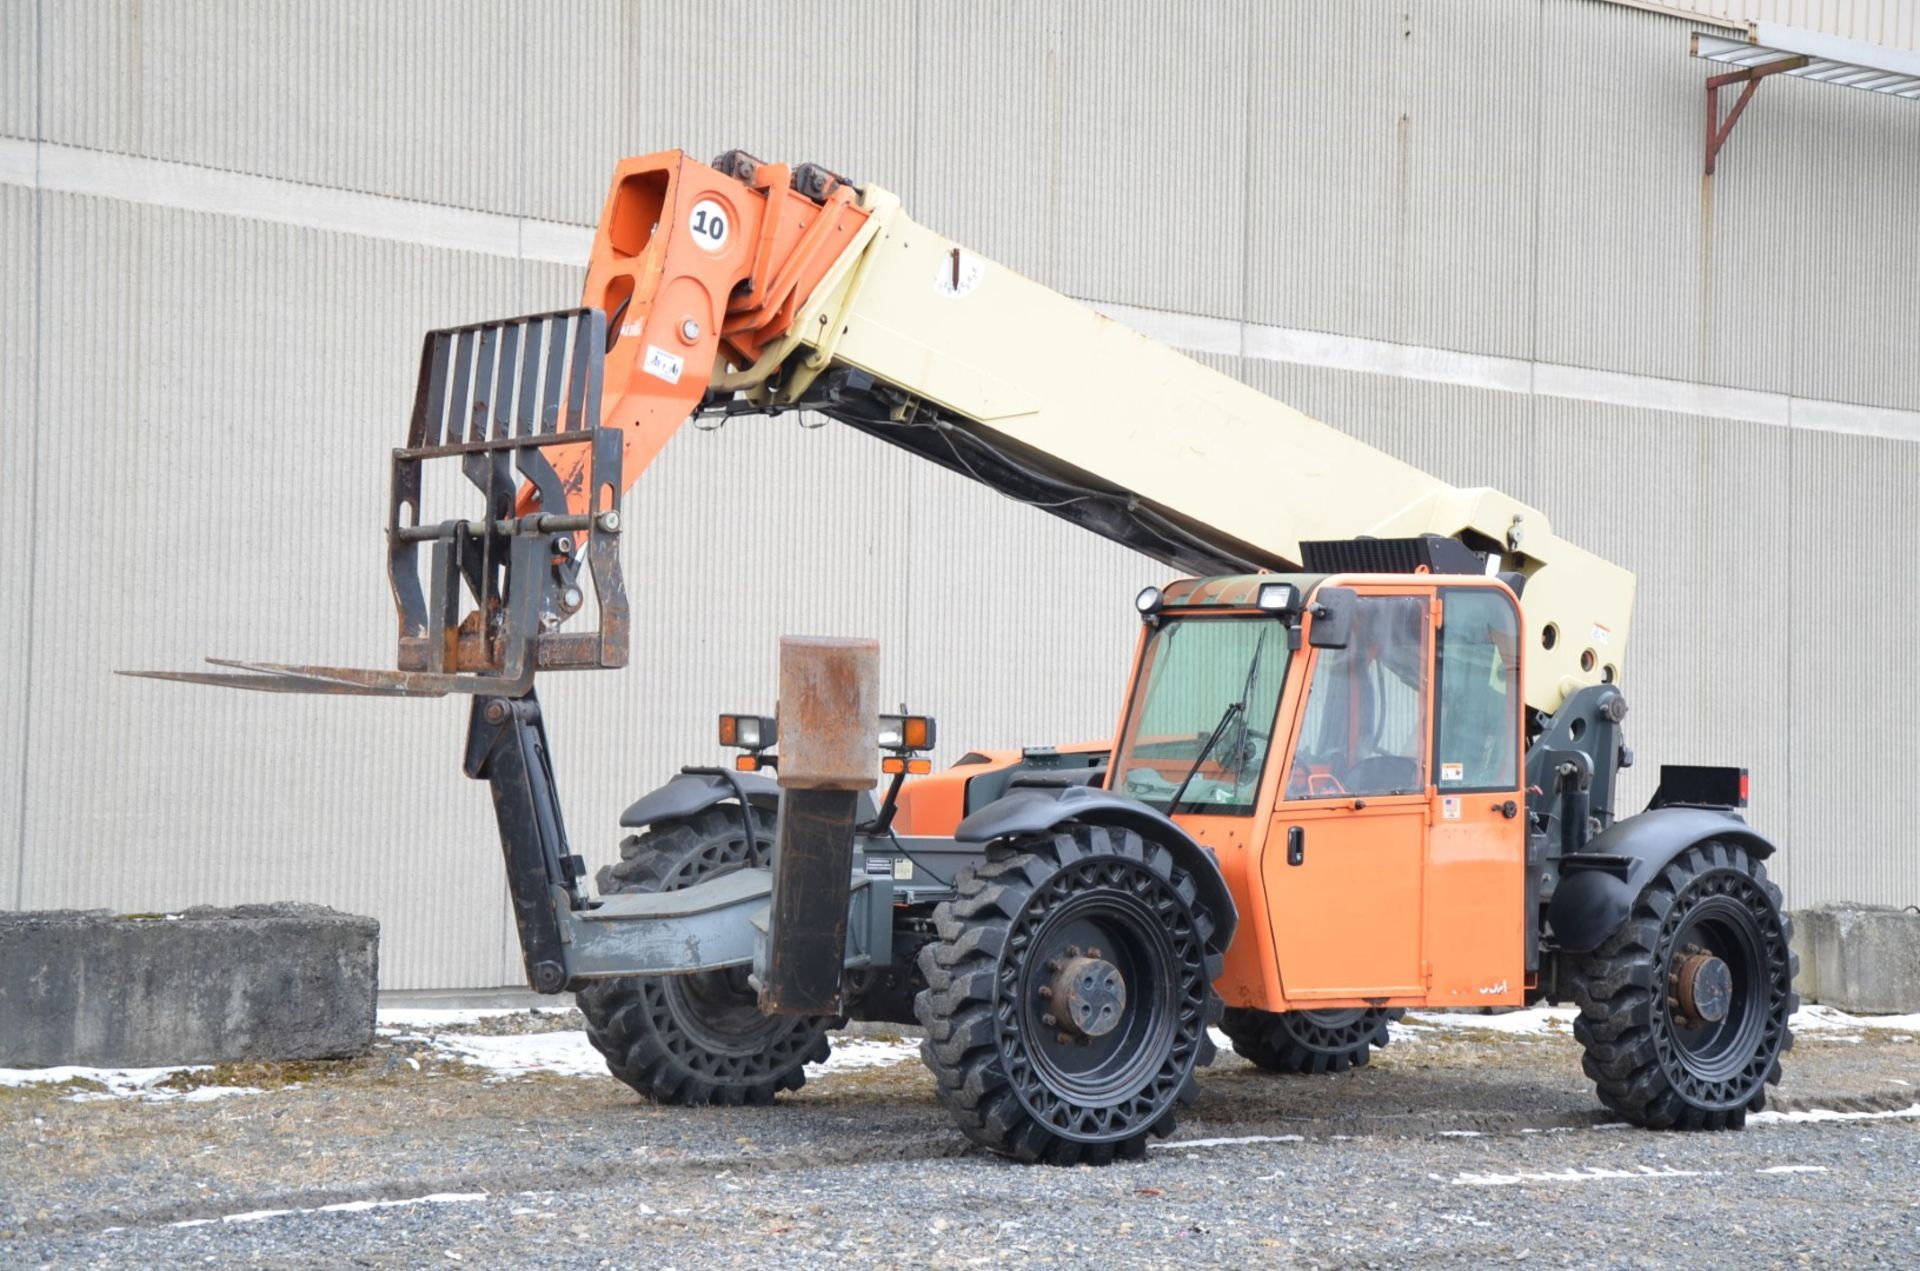 JLG (2011) G10-55A 10,000 LBS. CAPACITY DIESEL TELEHANDLER FORKLIFT WITH 56' MAX VERTICAL LIFT, - Image 4 of 23